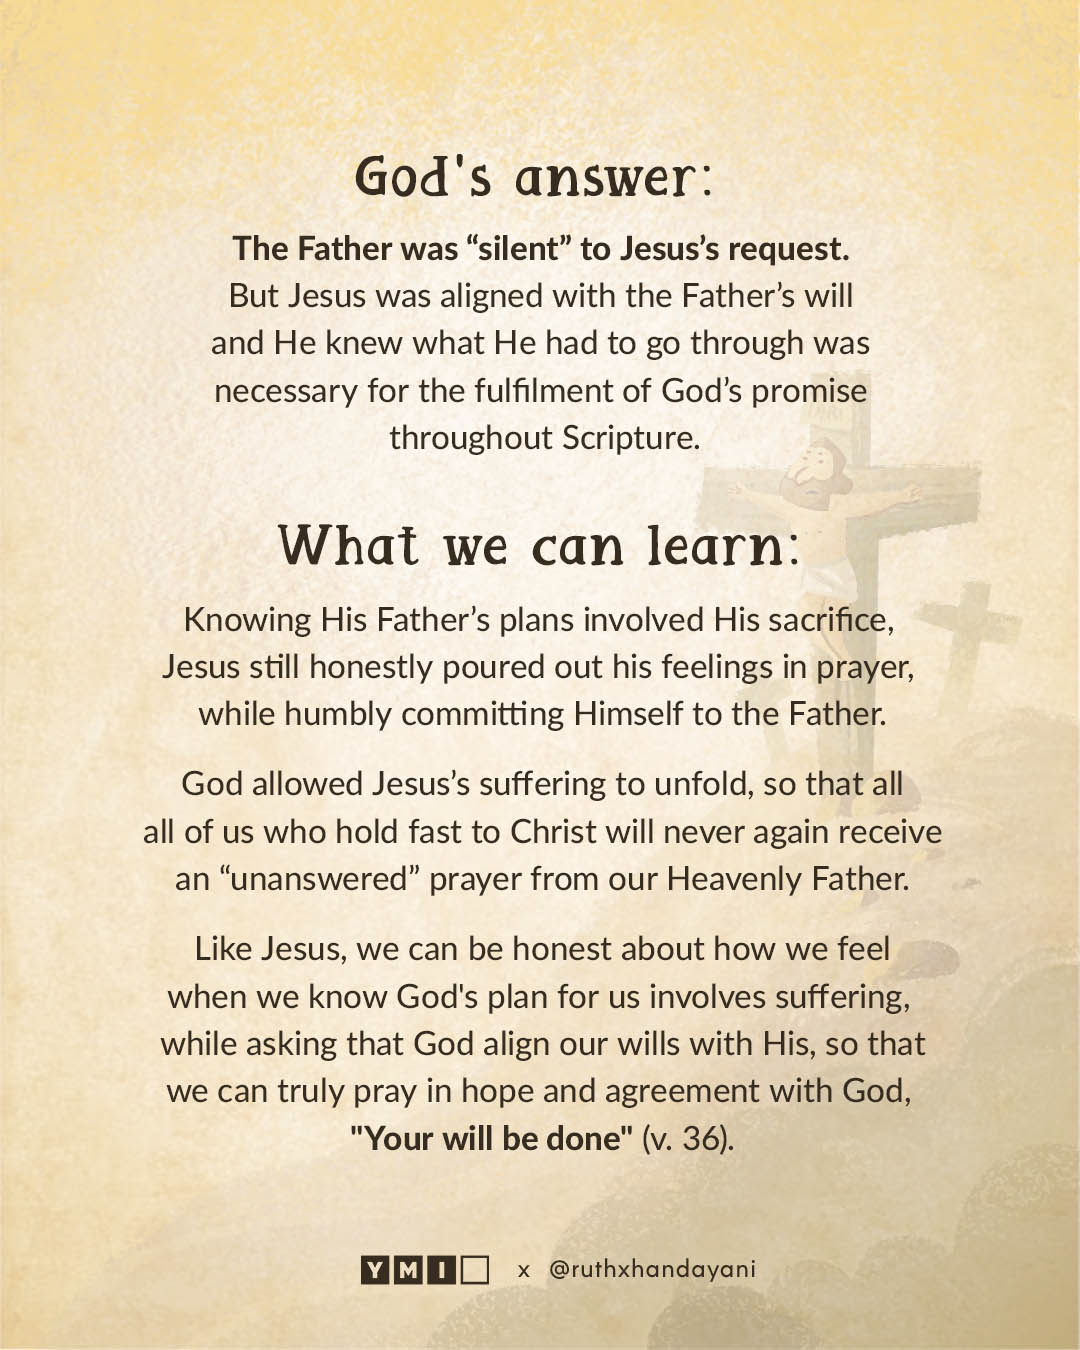 What we can learn from Jesus's prayer